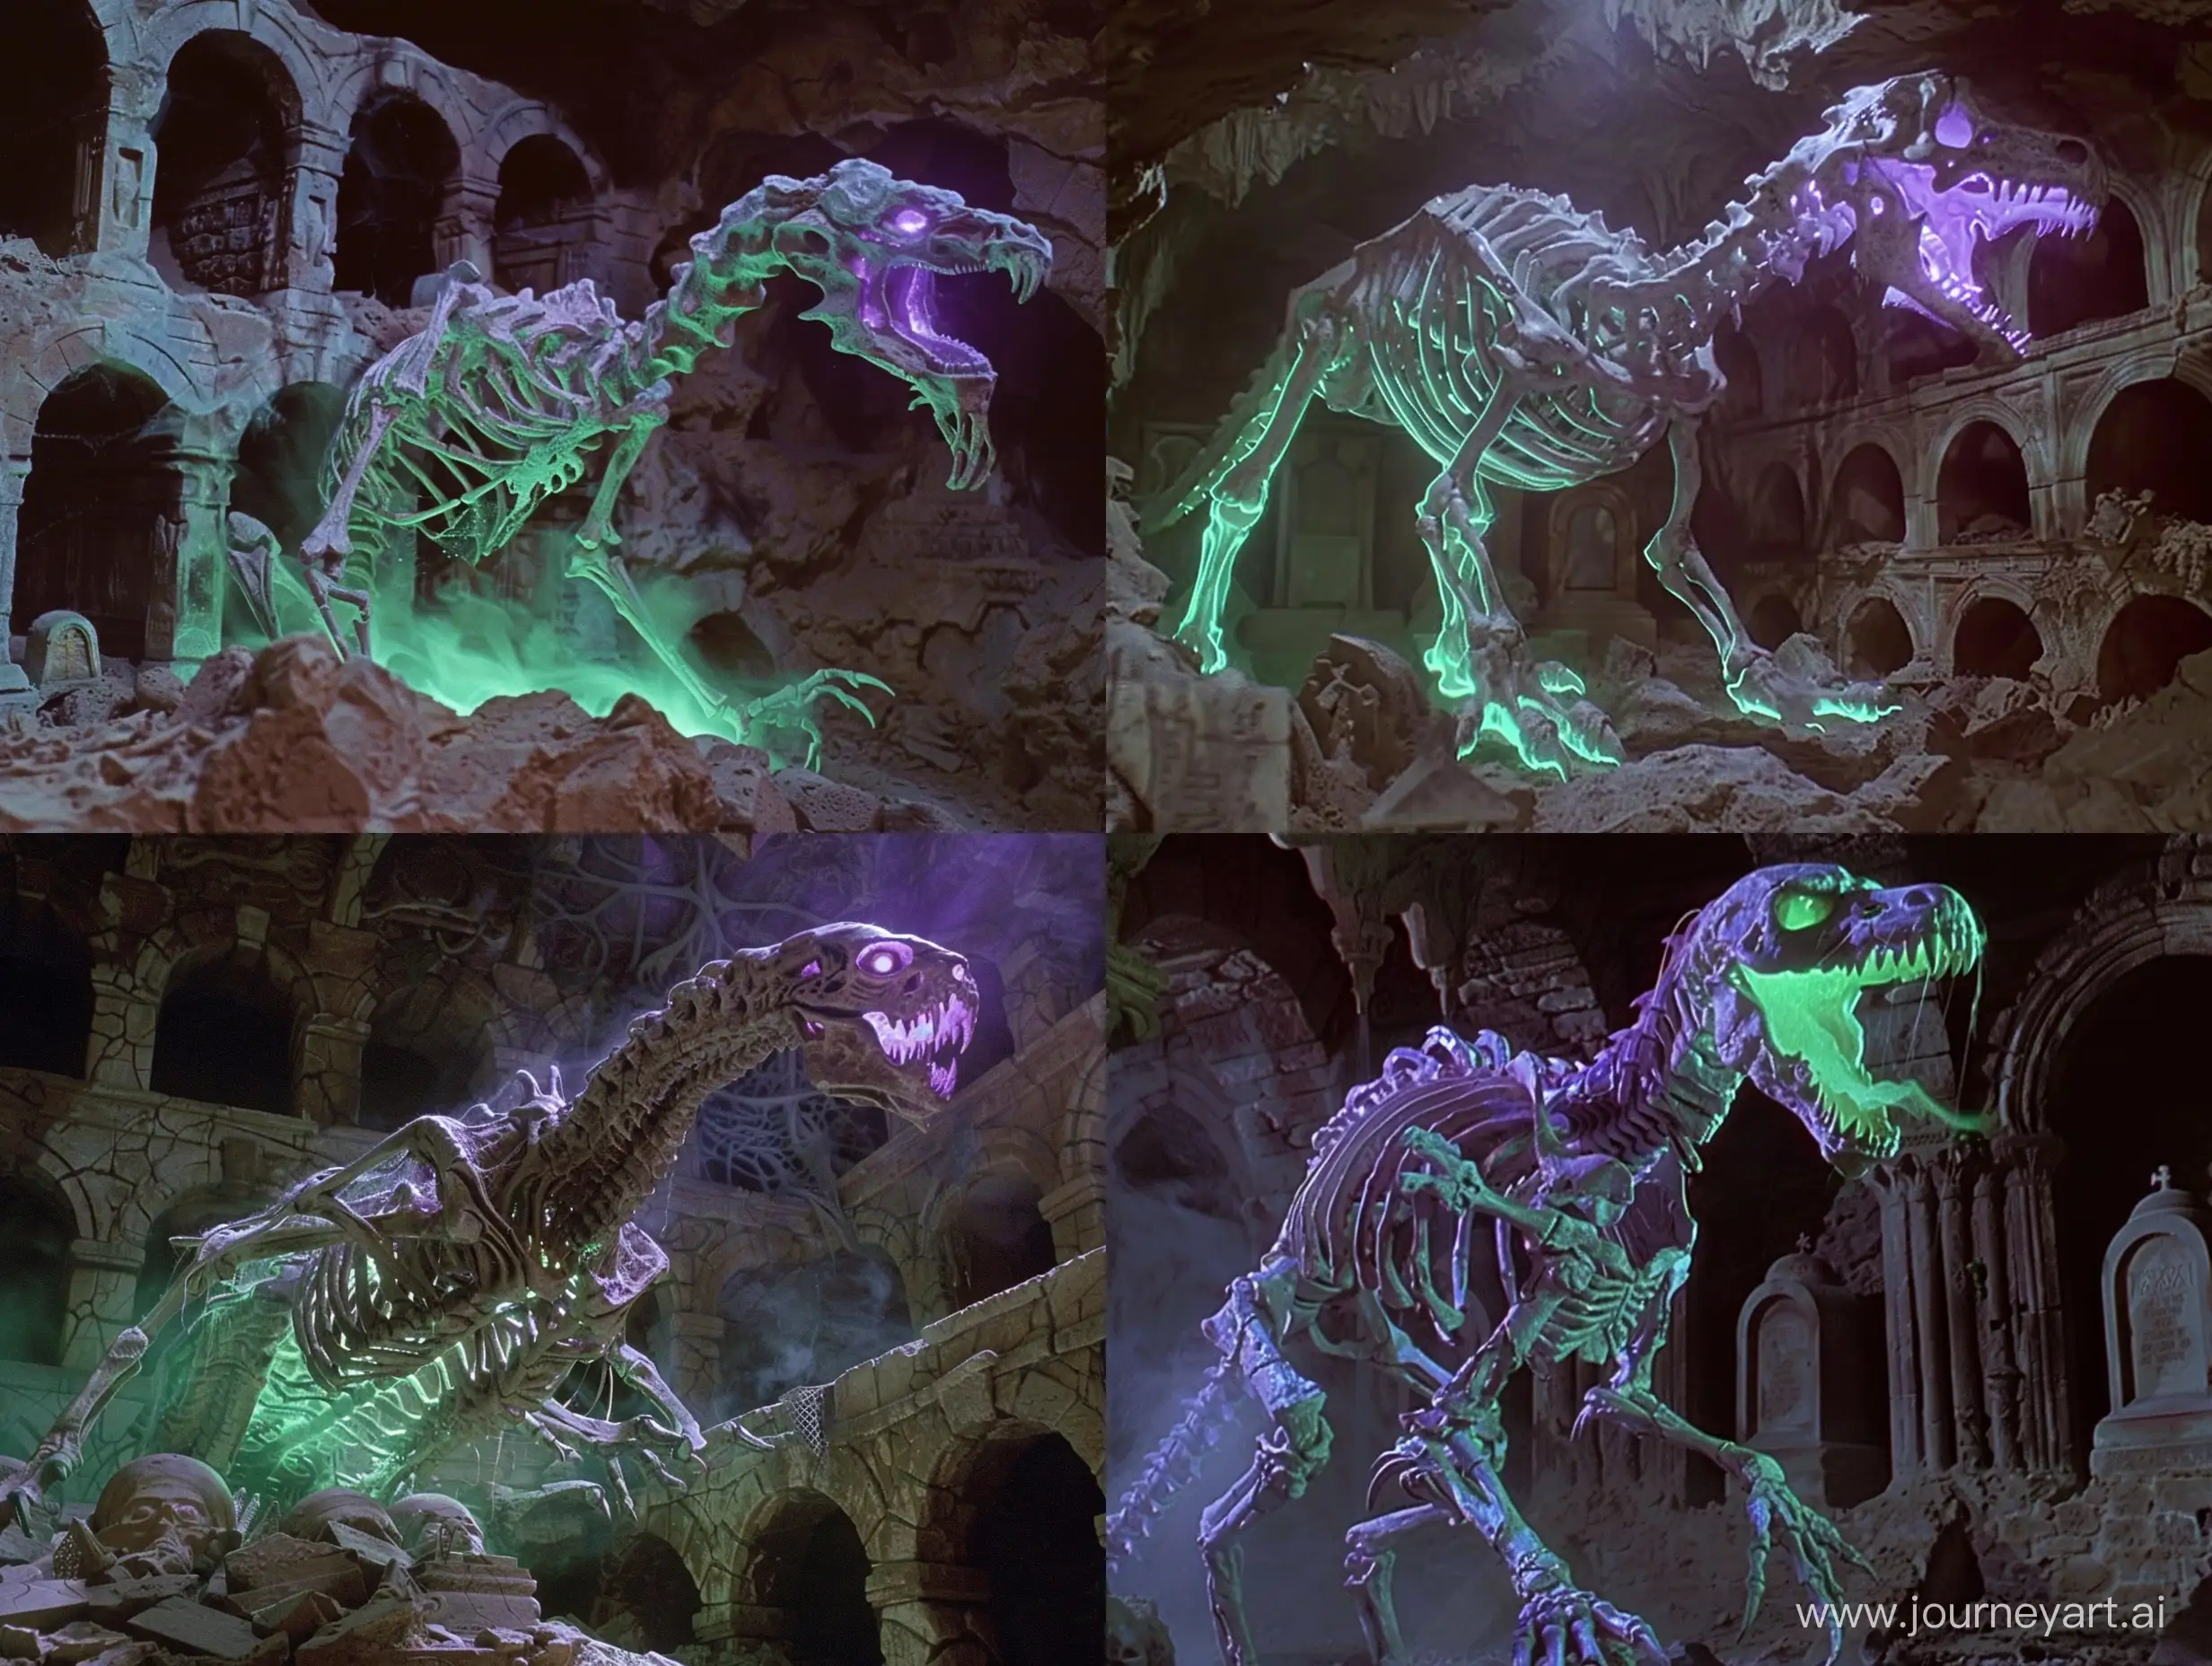 vhs dvd screengrabs character/arx fatalis ghost of an undead bone dragon glowing with a pale green purple glow within stone underground mausoleum catacomb with many arched burial vault niches dark fantasy 1980 style